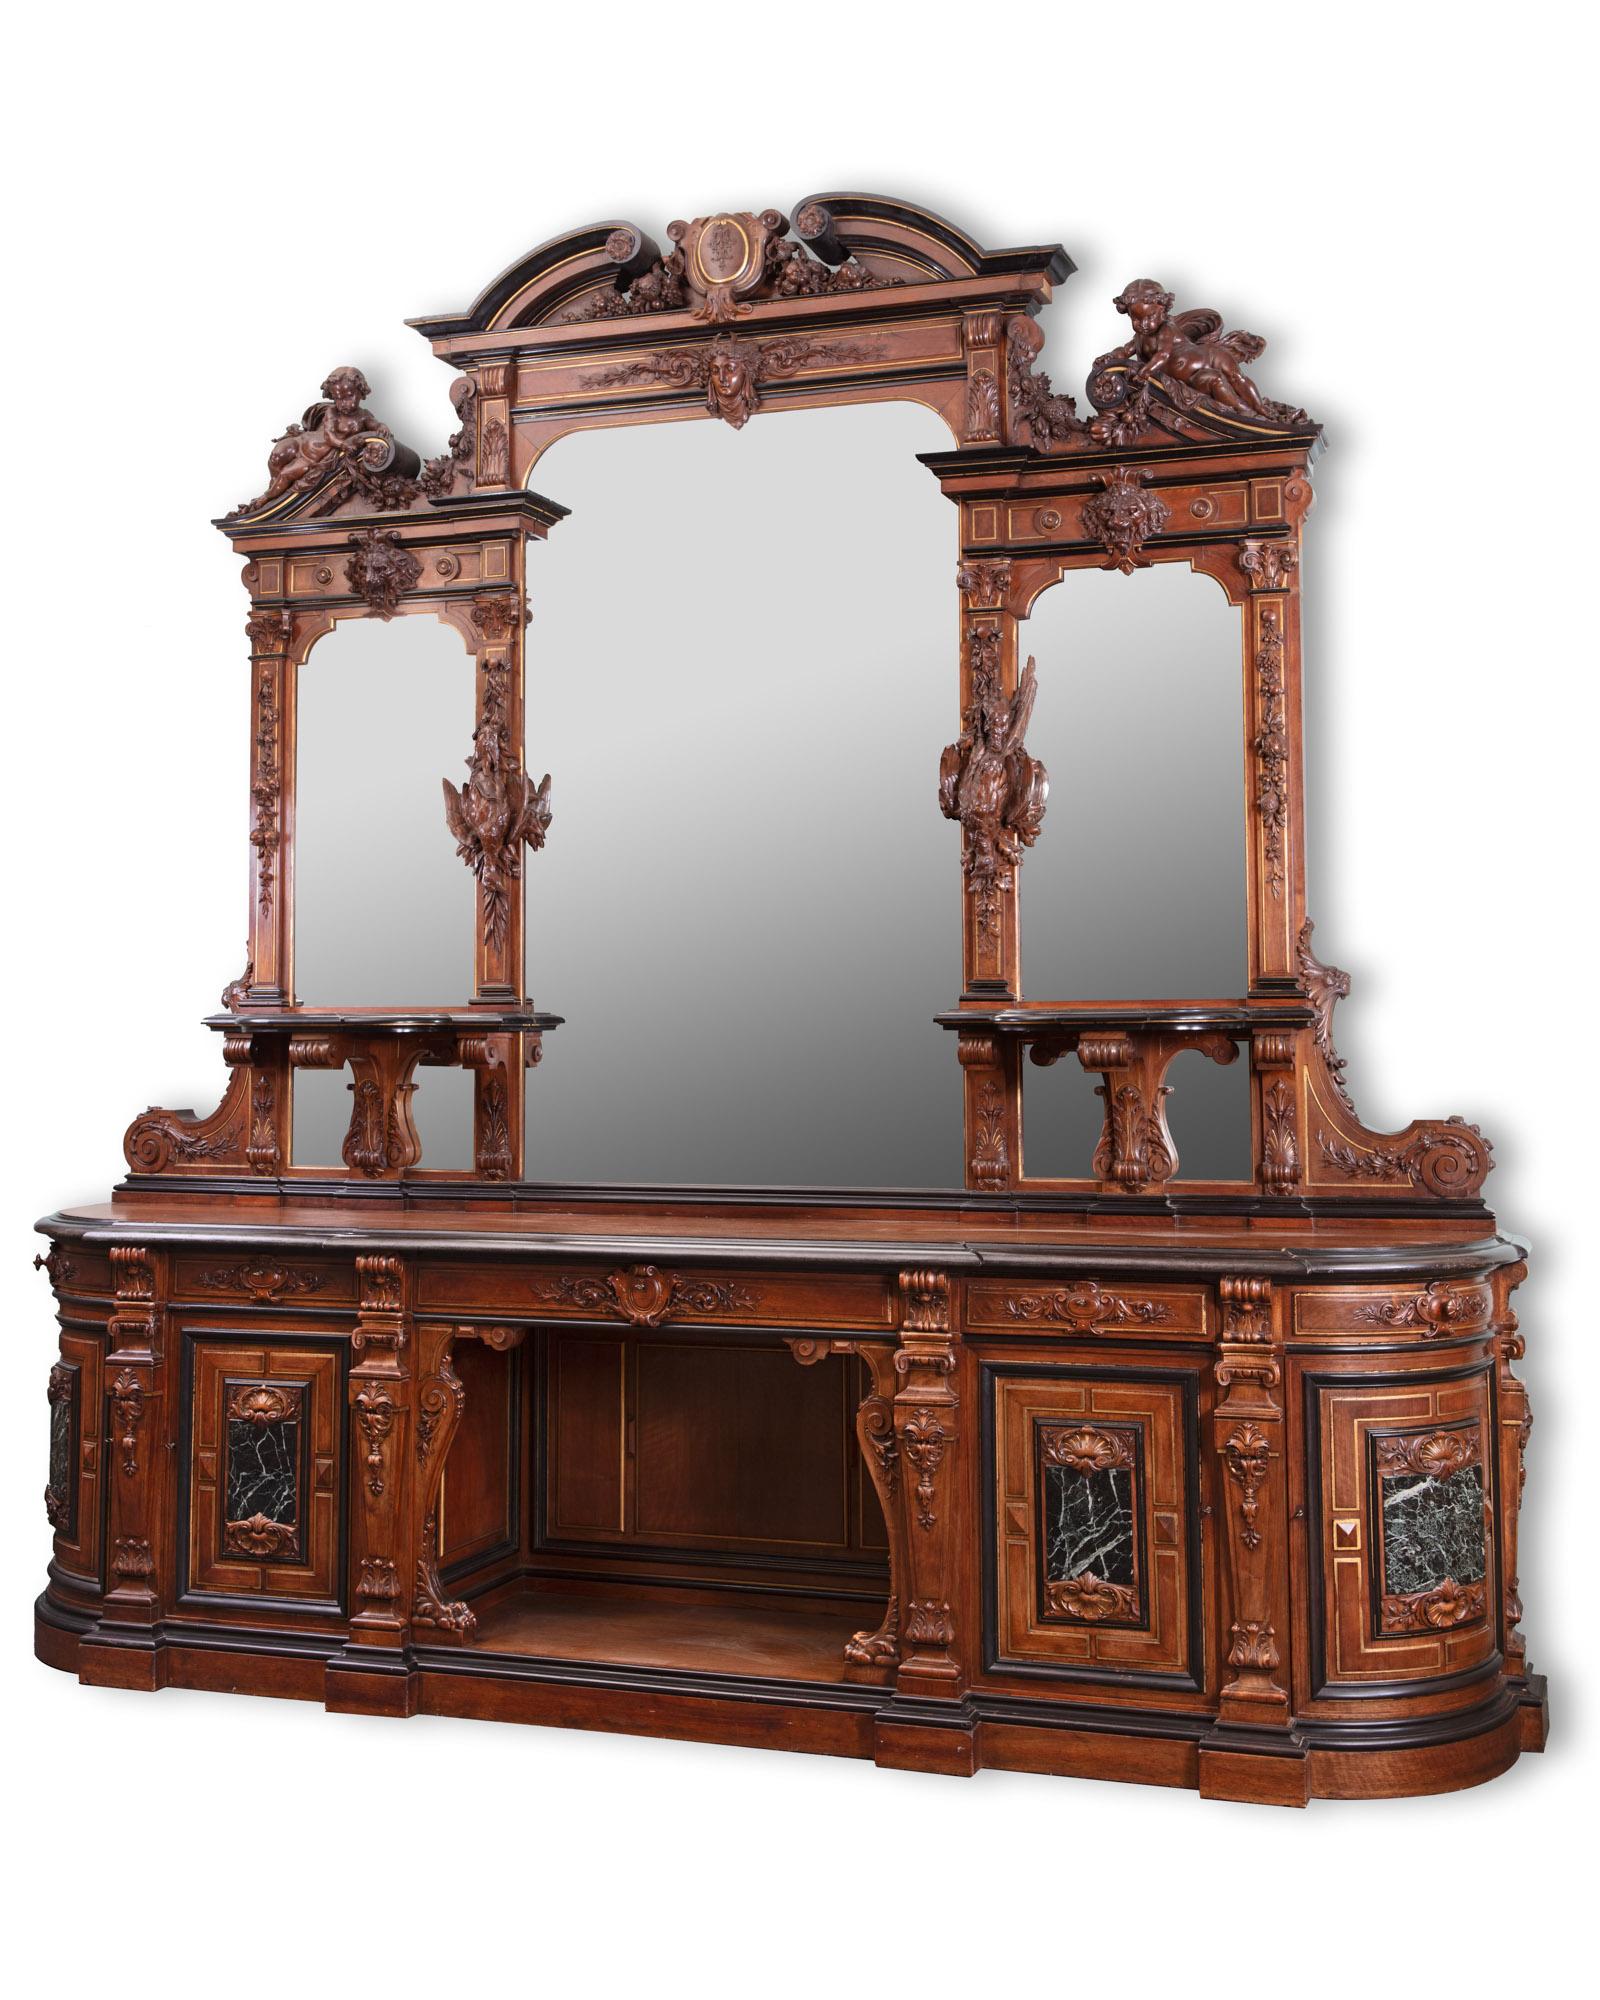 An important and monumental-sized carved Walnut mirrored French buffet by Guéret Frères, Rue Lafayette 216, Paris. Napoleon III style, between 1870 and 1877.

Renowned for their exquisite wood carving, Guéret Frères truly made their statement piece,